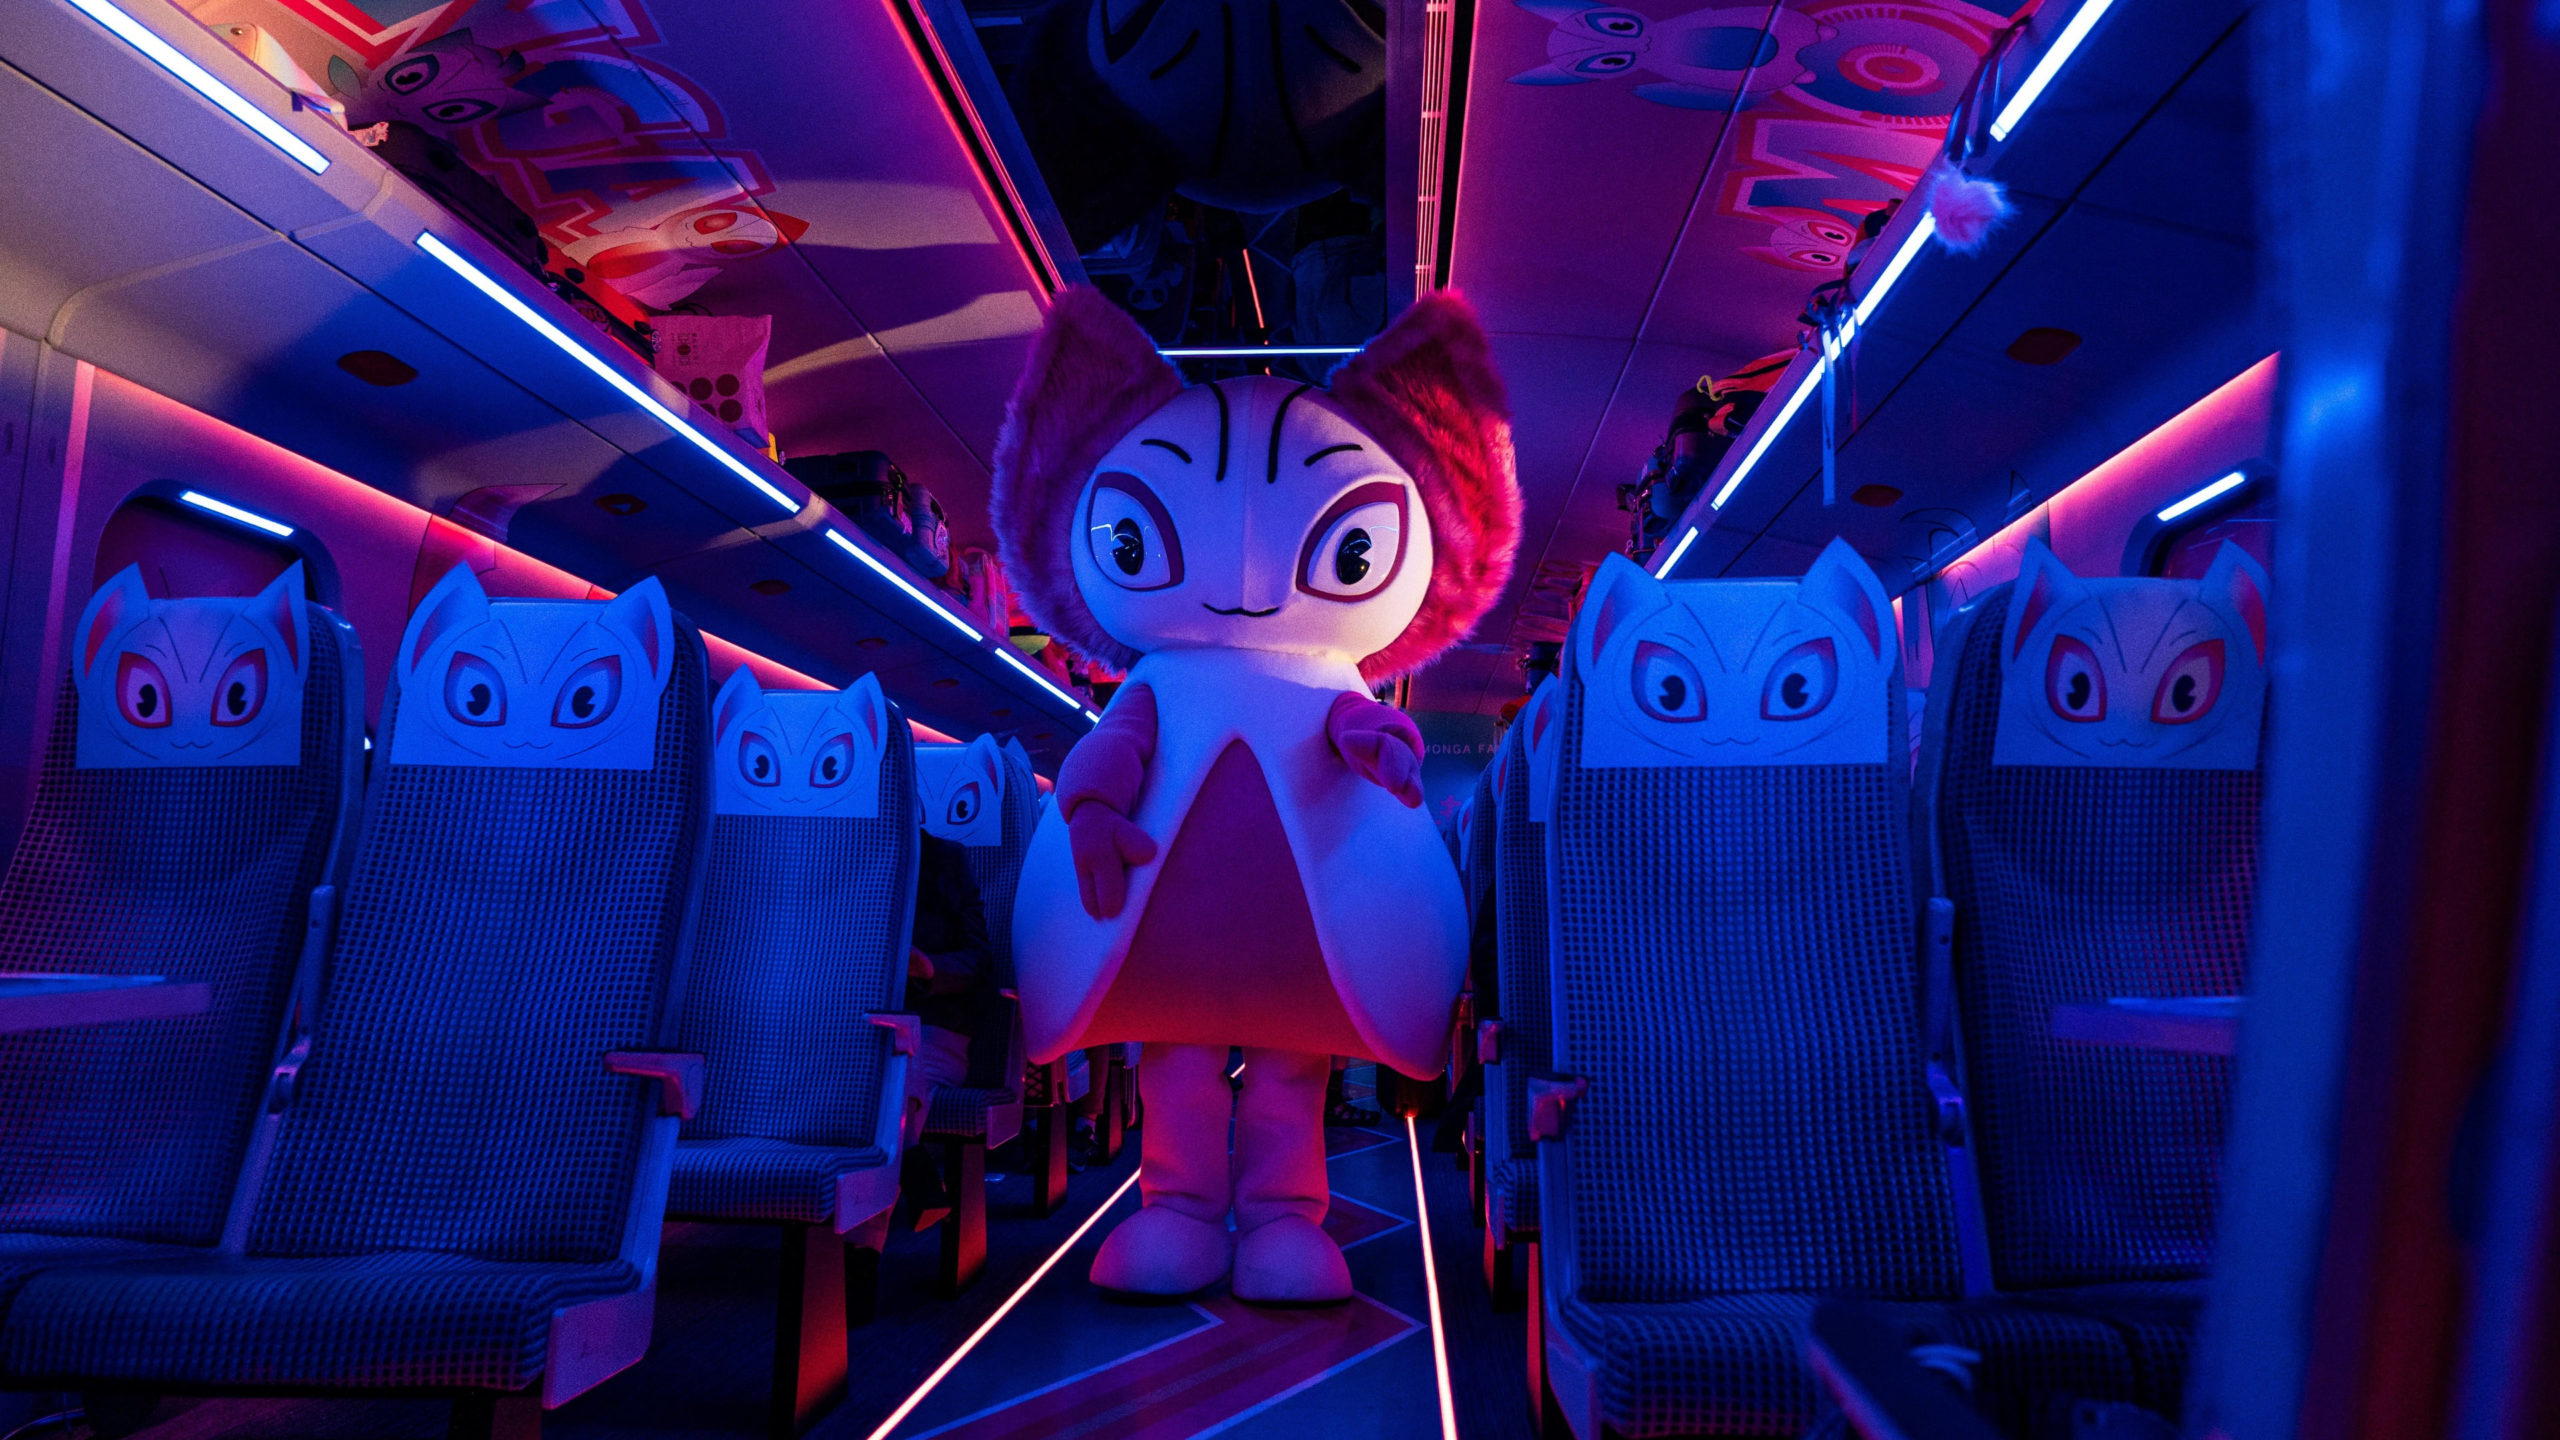 An image from Bullet Train of someone in a costume of an animated pink character surrounded by seats in matching covers on the train